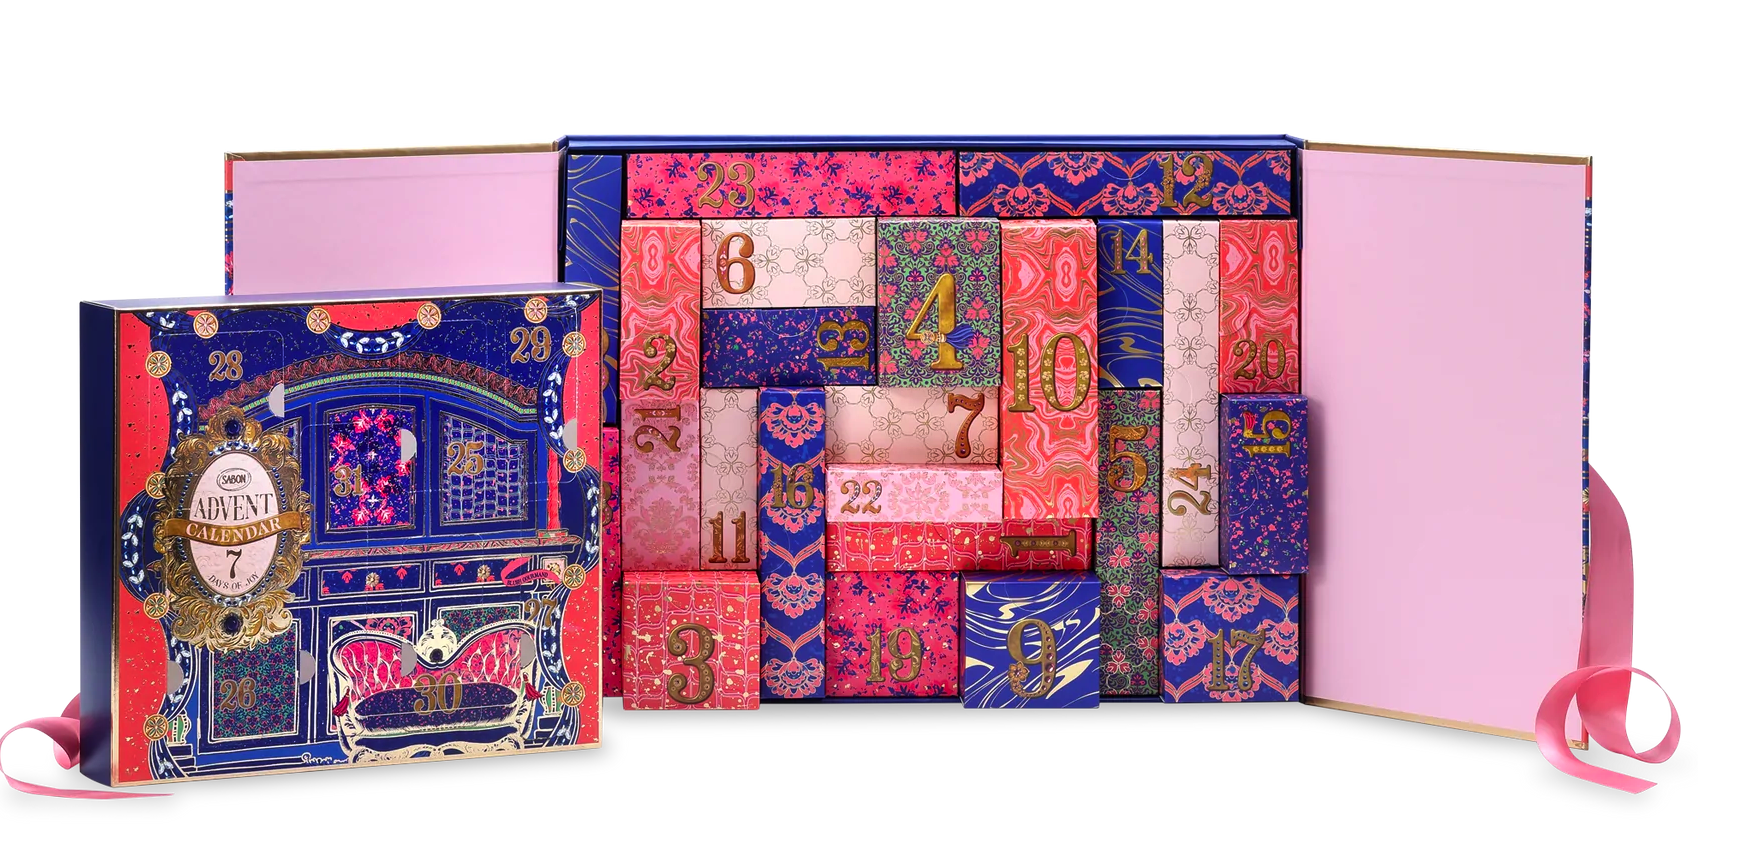 2022 Sabon Beauty Advent Calendars: Exciting Beauty Gifts! - Hello